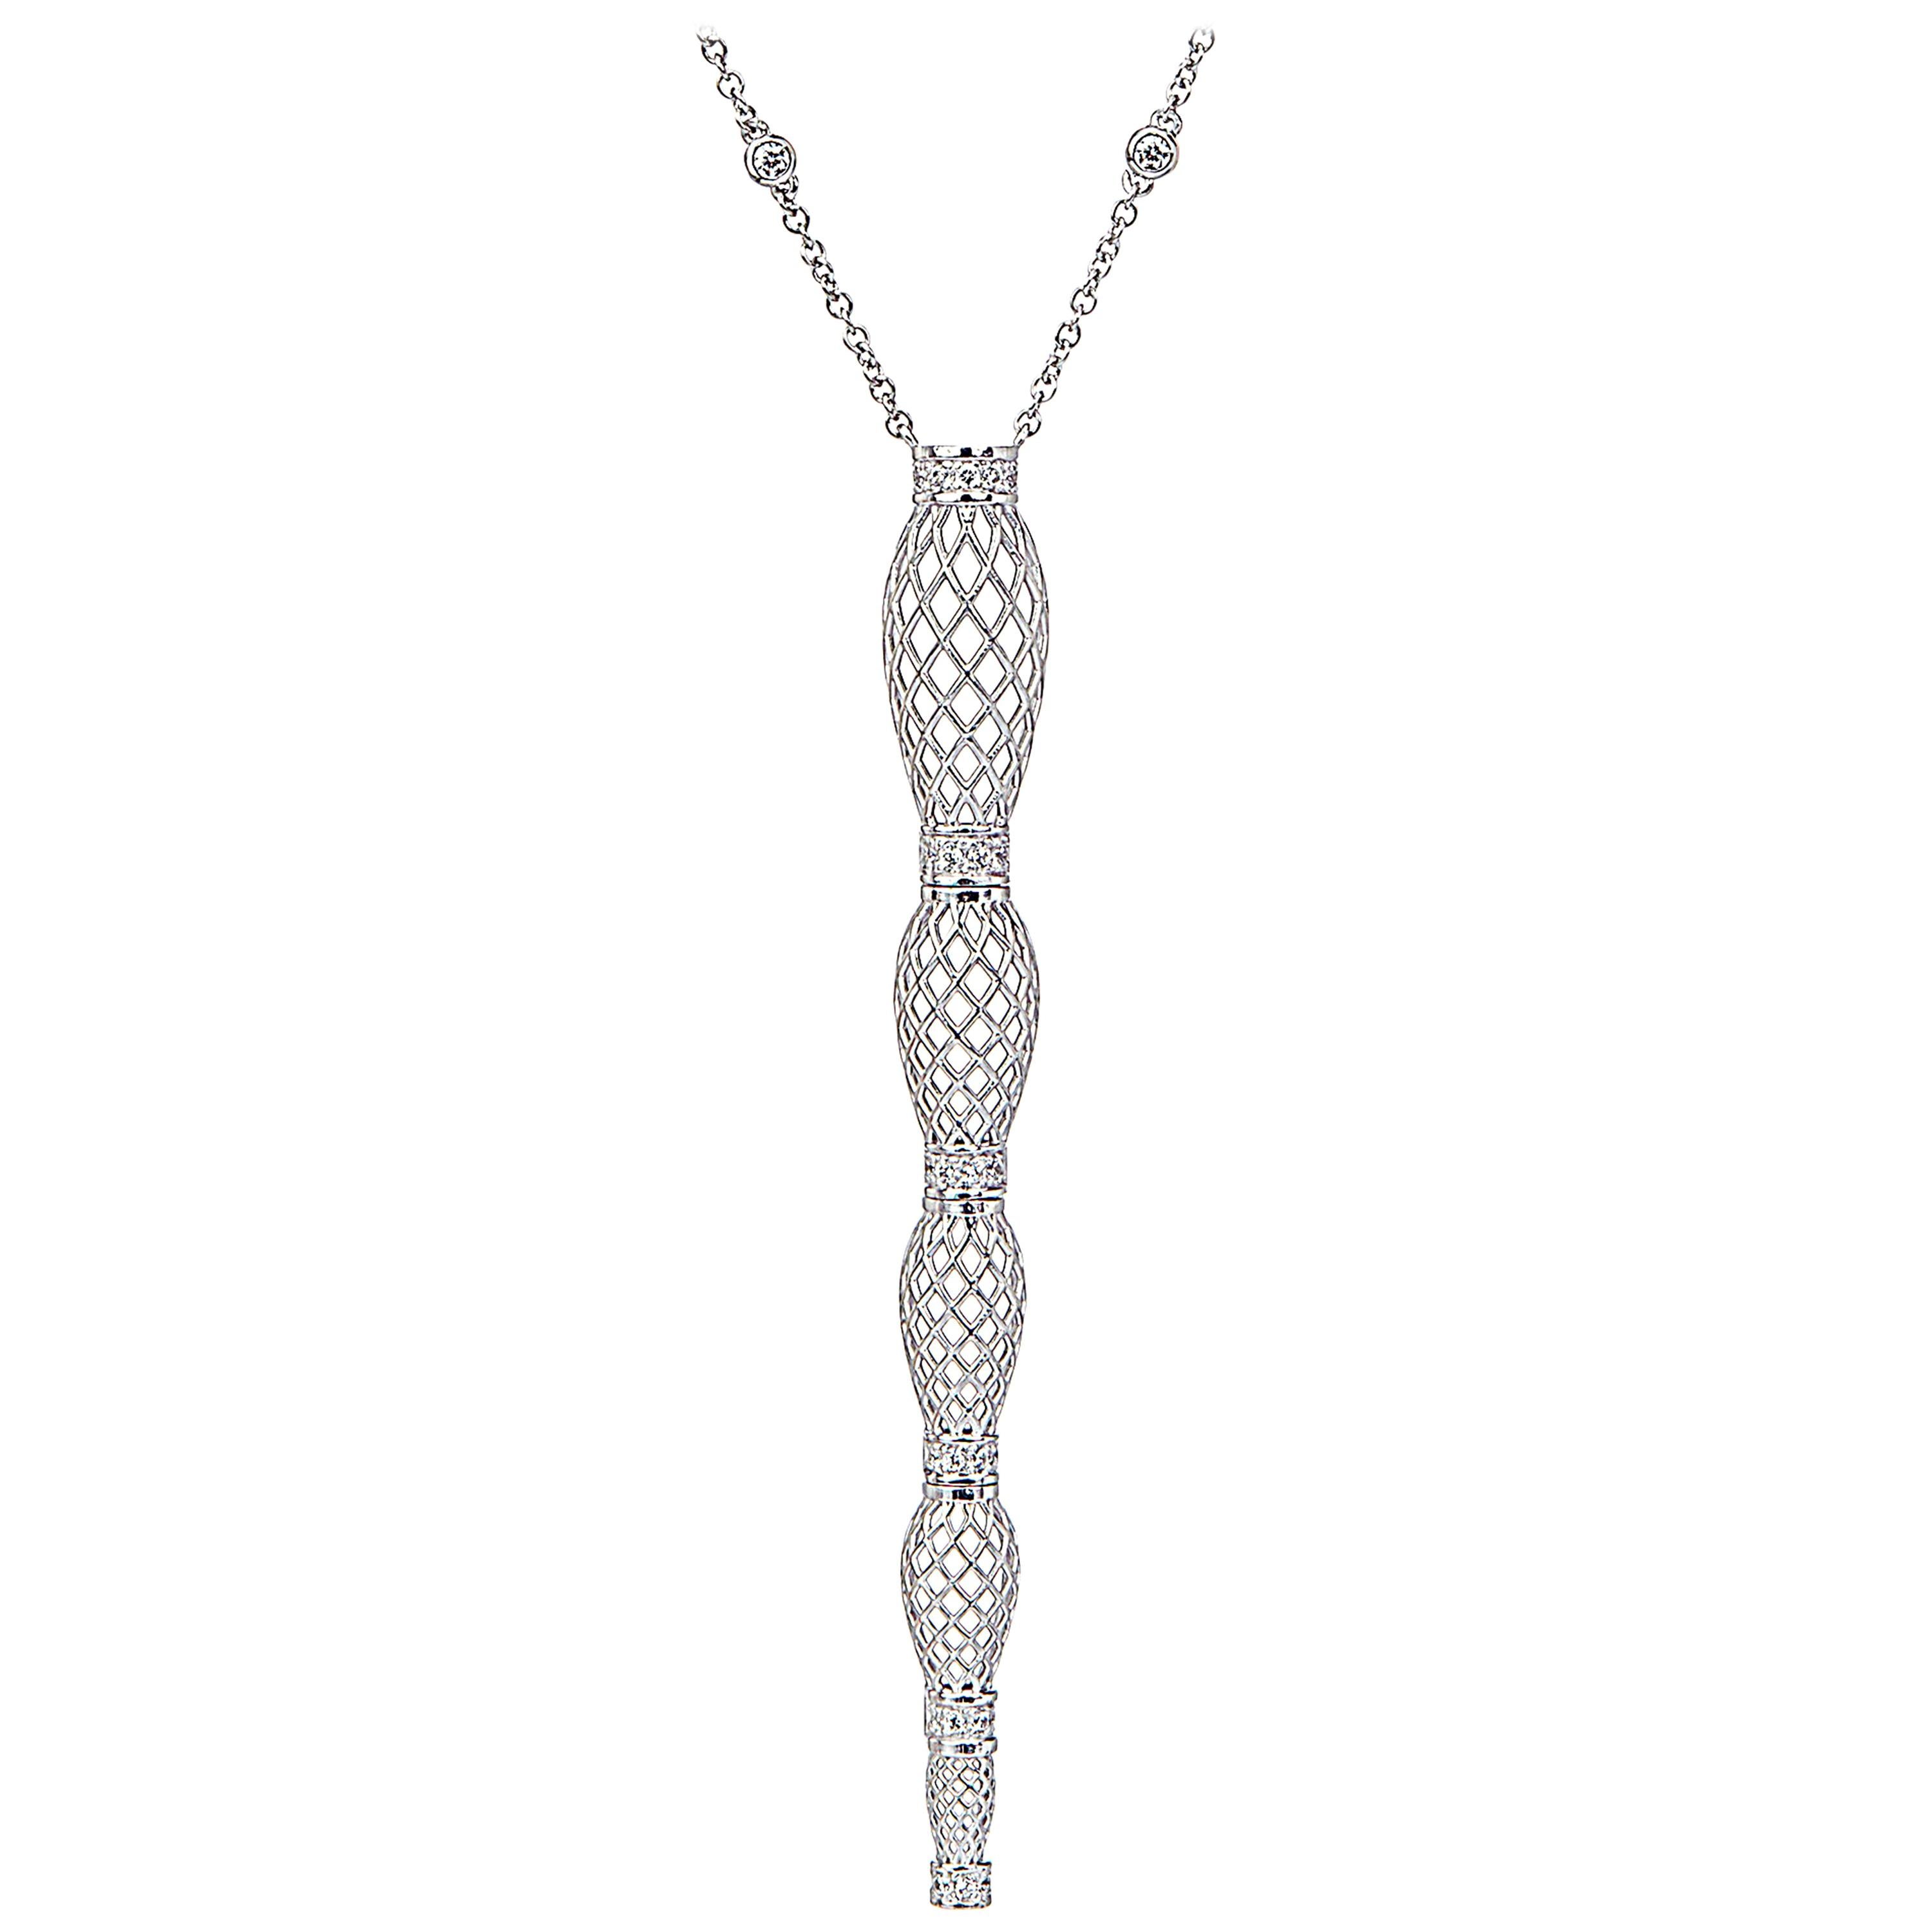 Yemyungji Diamond 0.41ct 18 Karat White Gold Curved line Chain Pendant Necklace For Sale